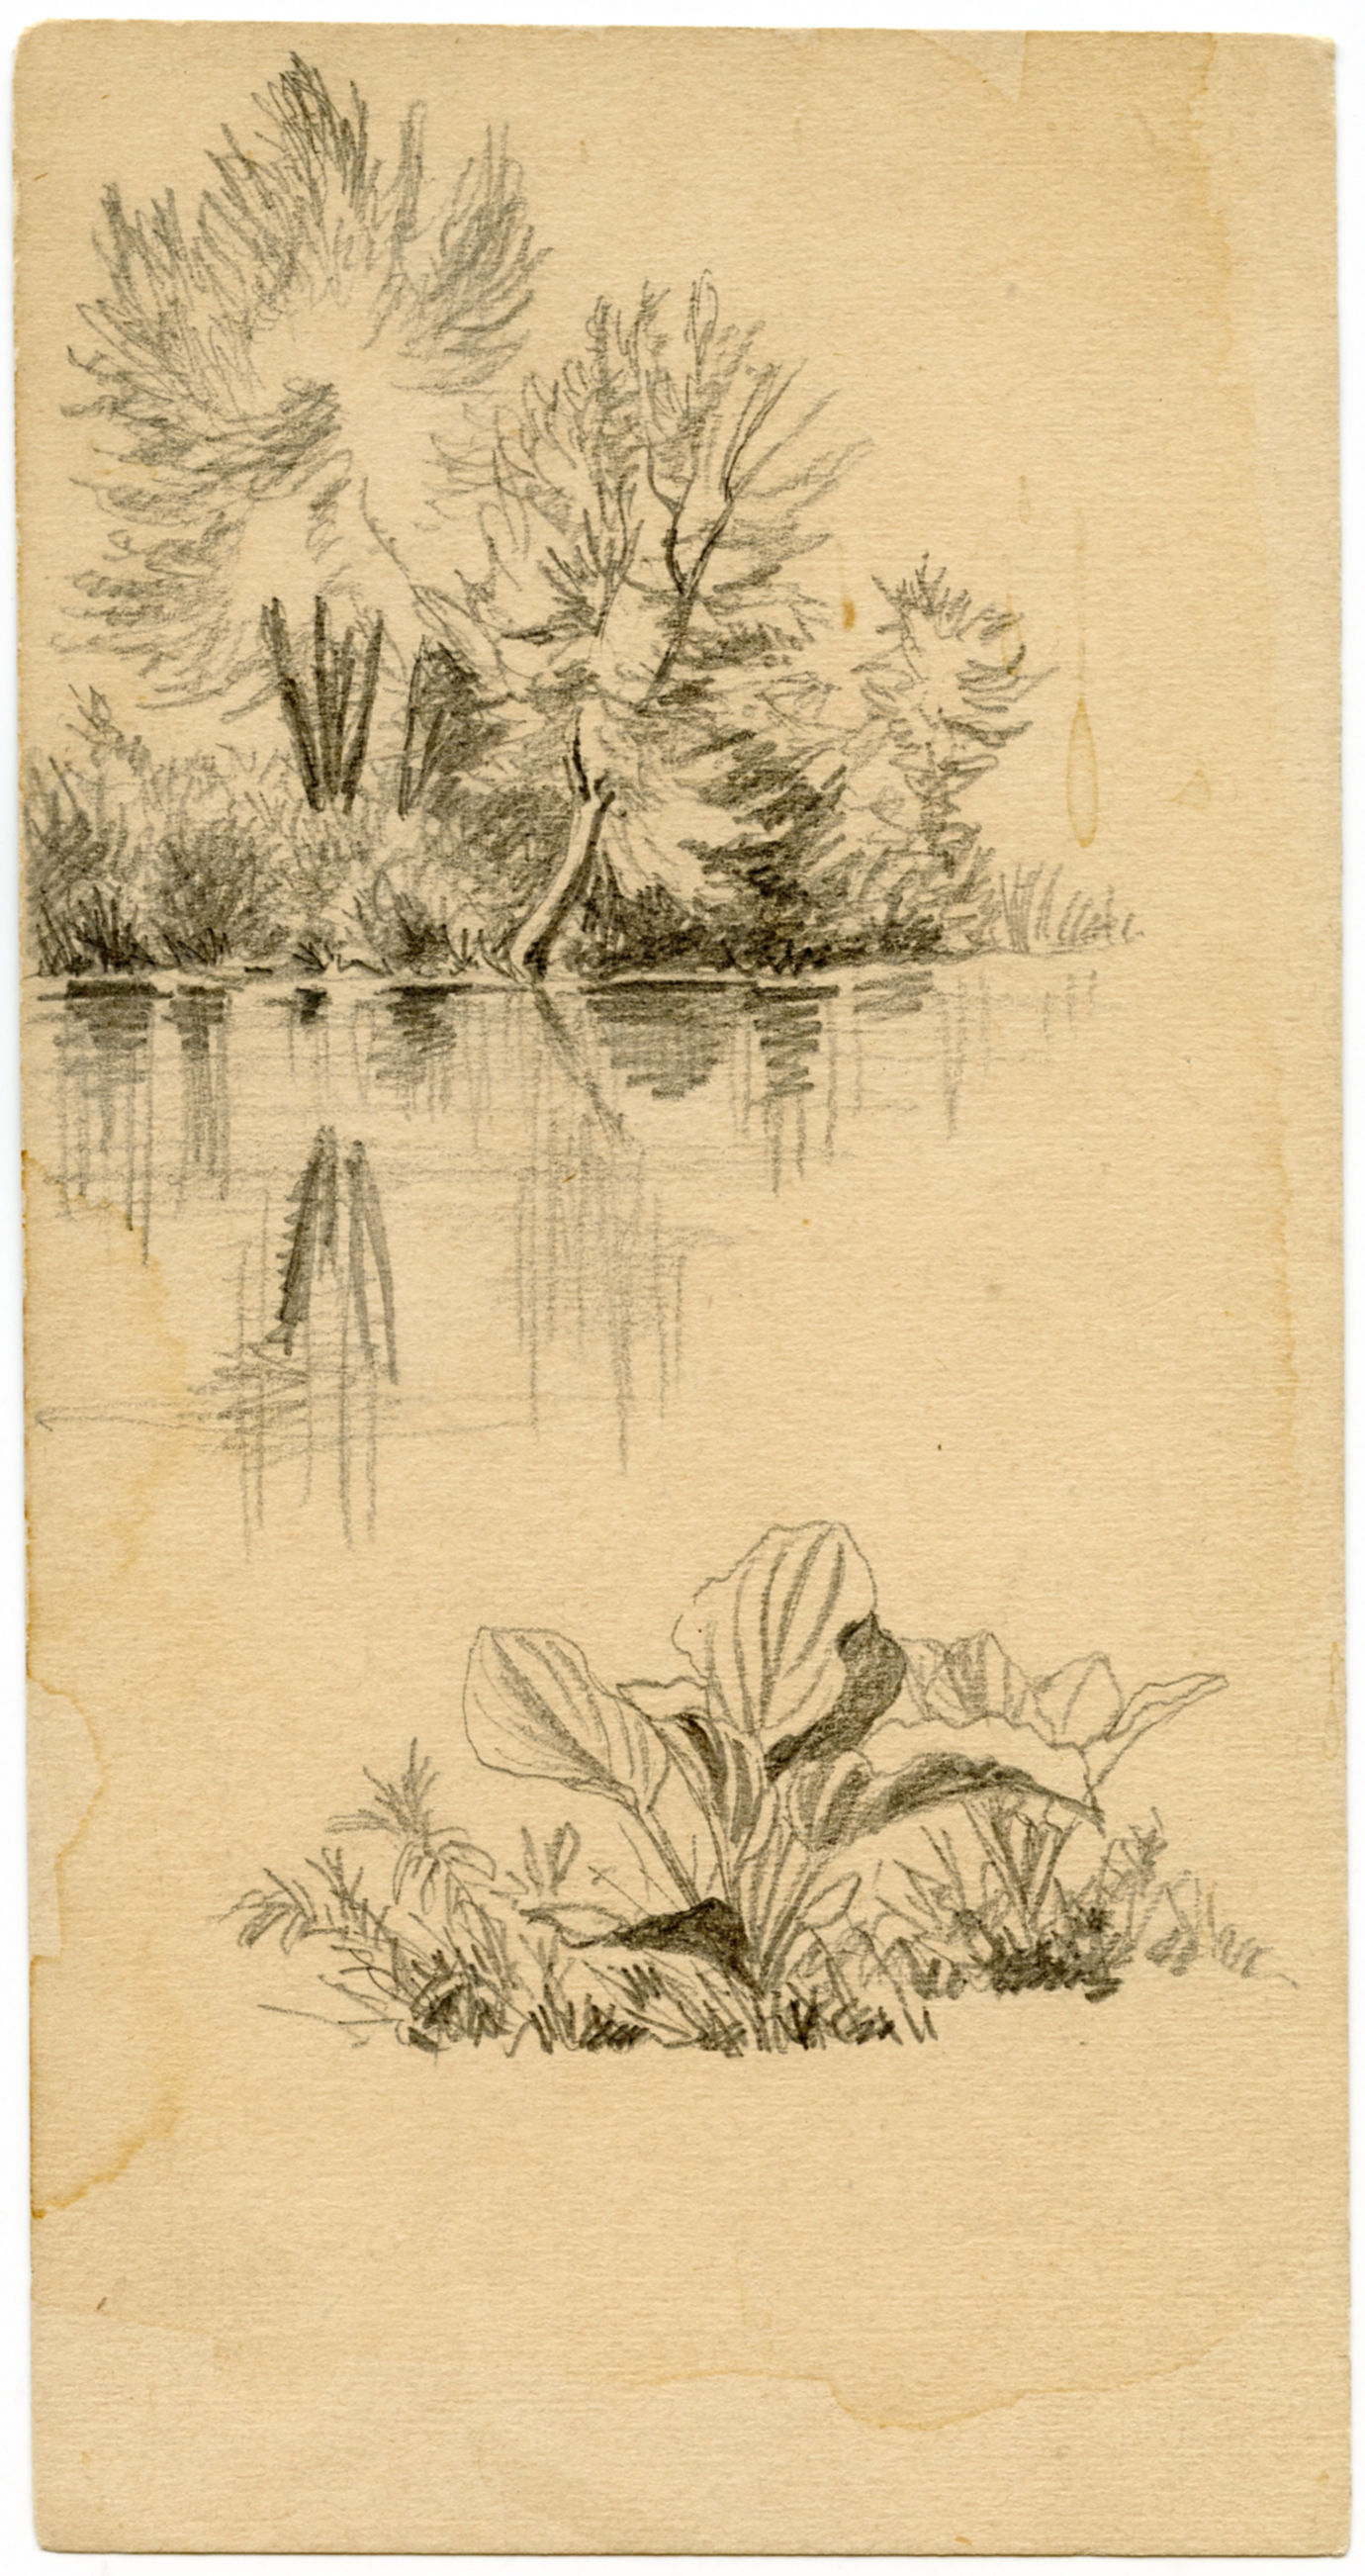 Plant at bottom center with river and bank with trees behind